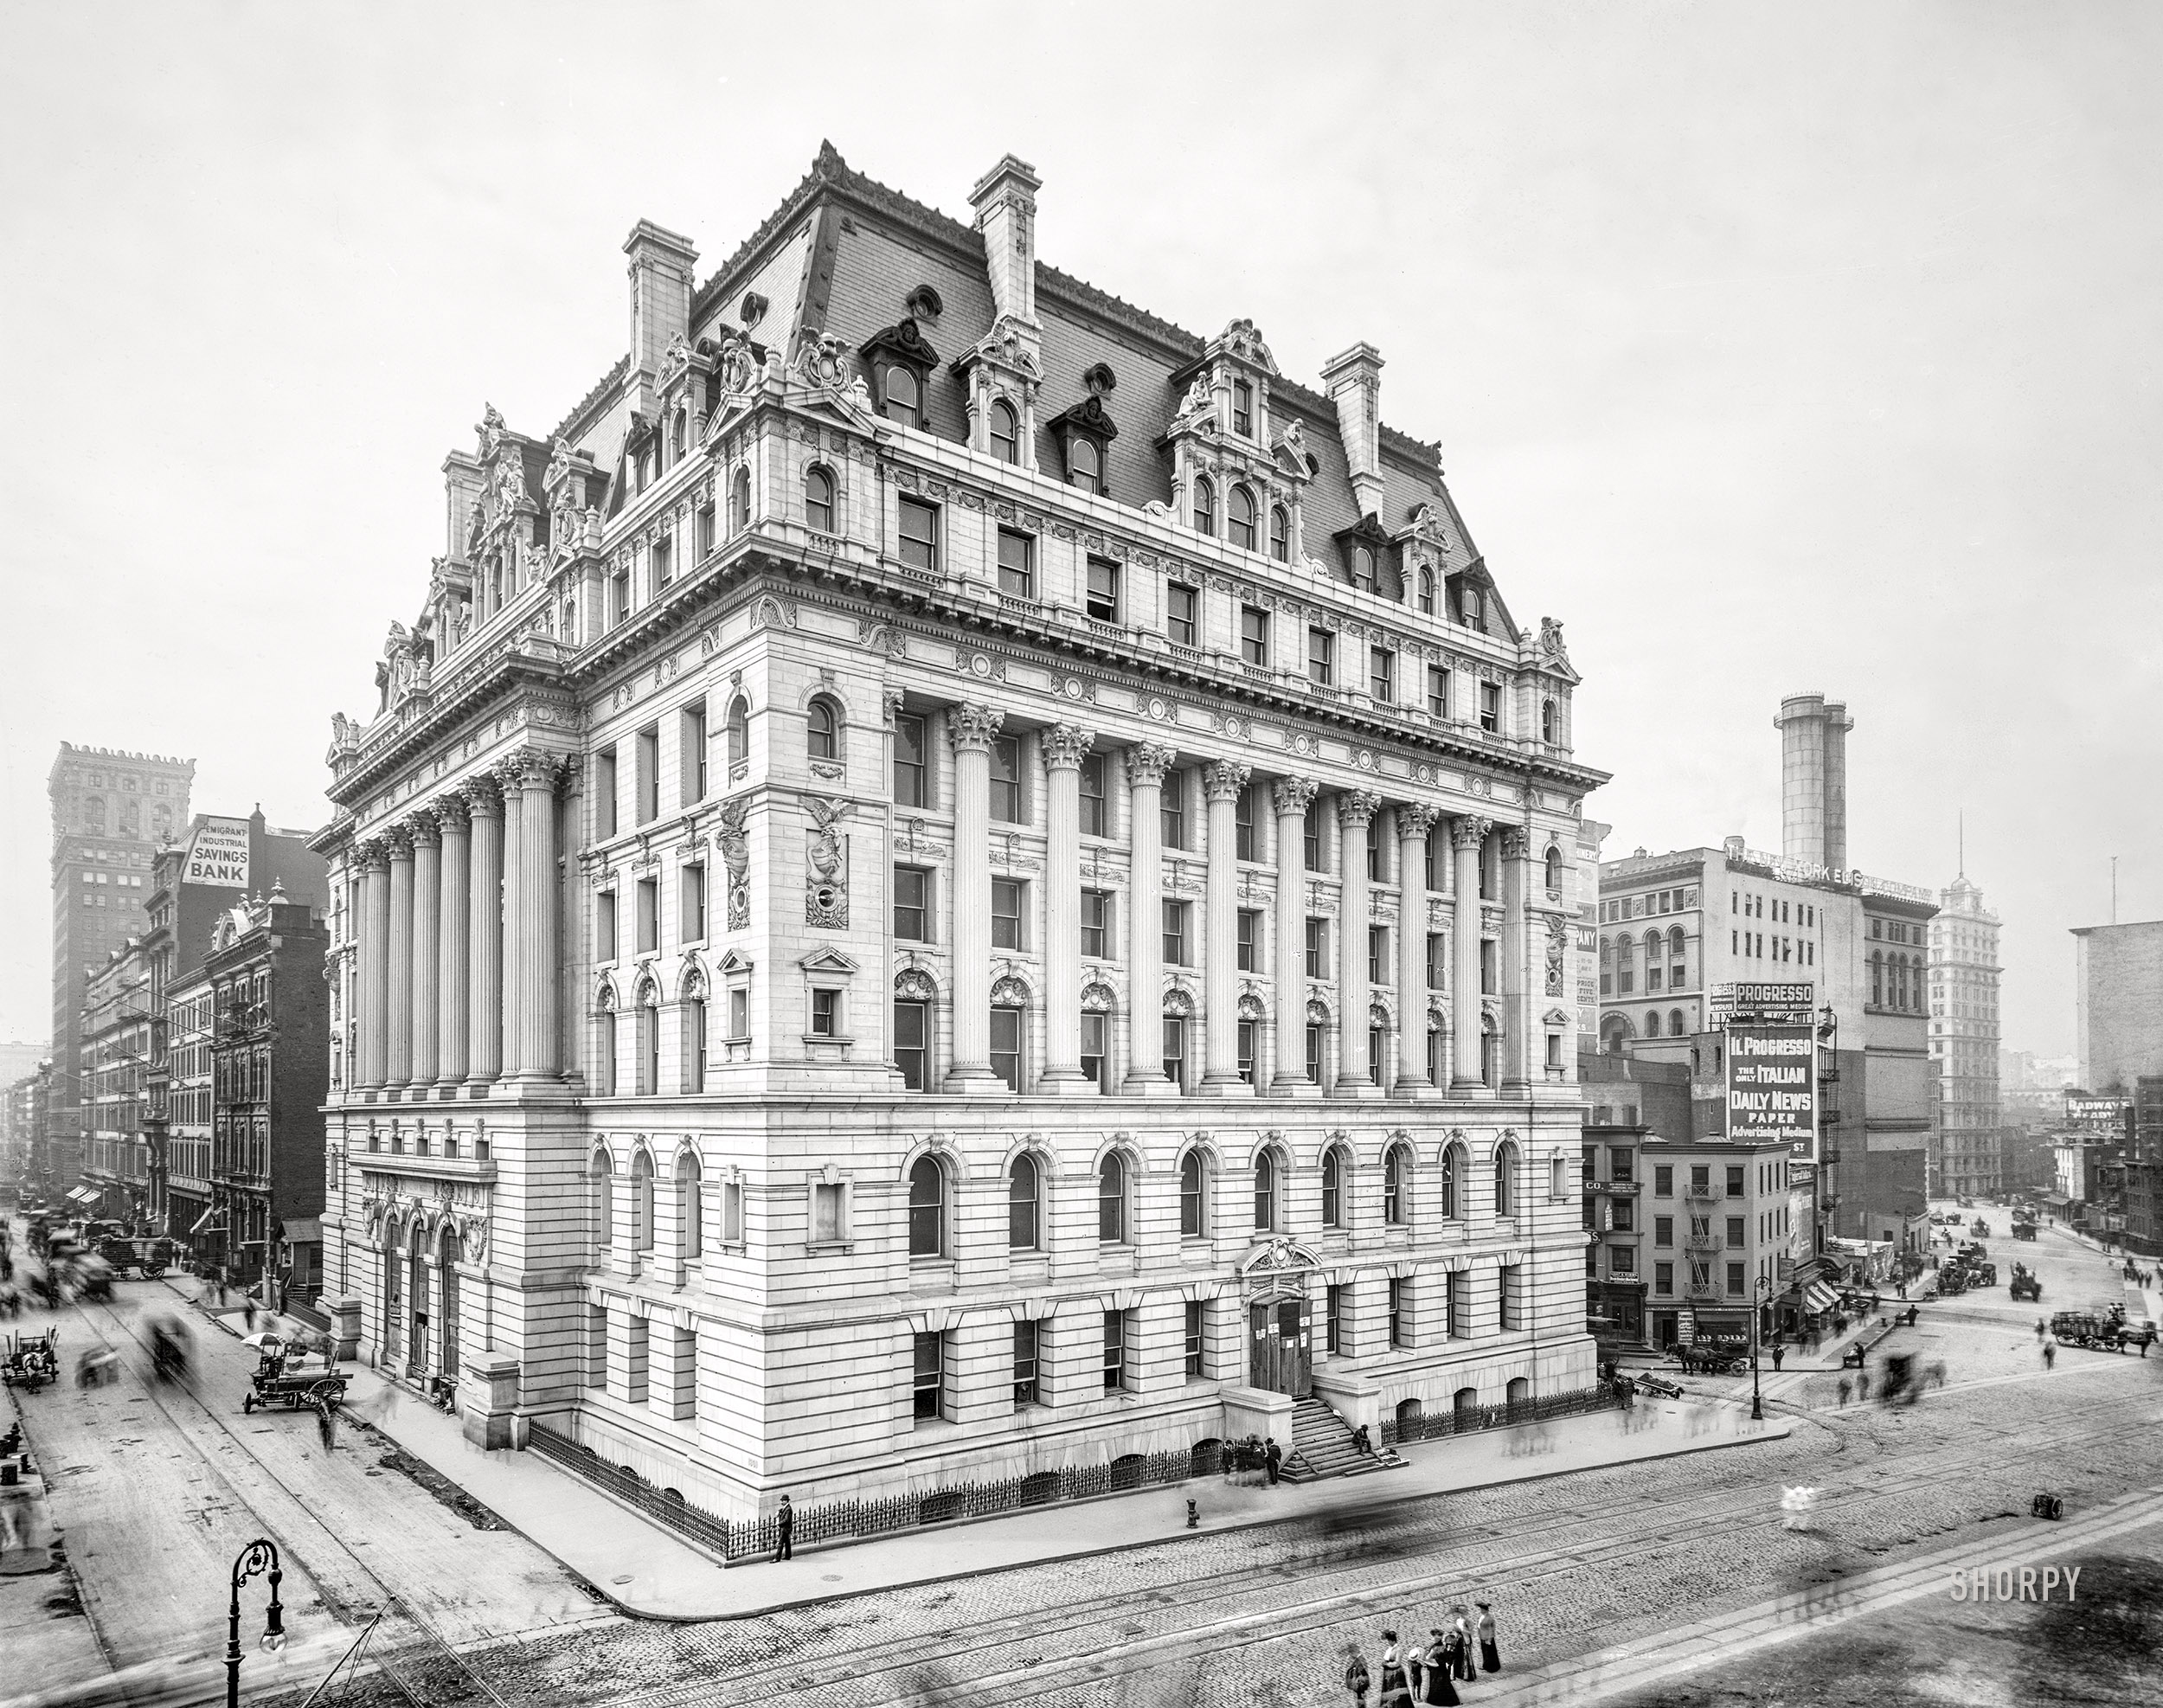 New York, 1905. "Hall of Records (Surrogate's Courthouse), Chambers and Centre streets." The building two years prior to its completion, minus many of the statues that can be seen in this later view from 1910. 8x10 inch glass negative, Detroit Publishing Company. View full size.